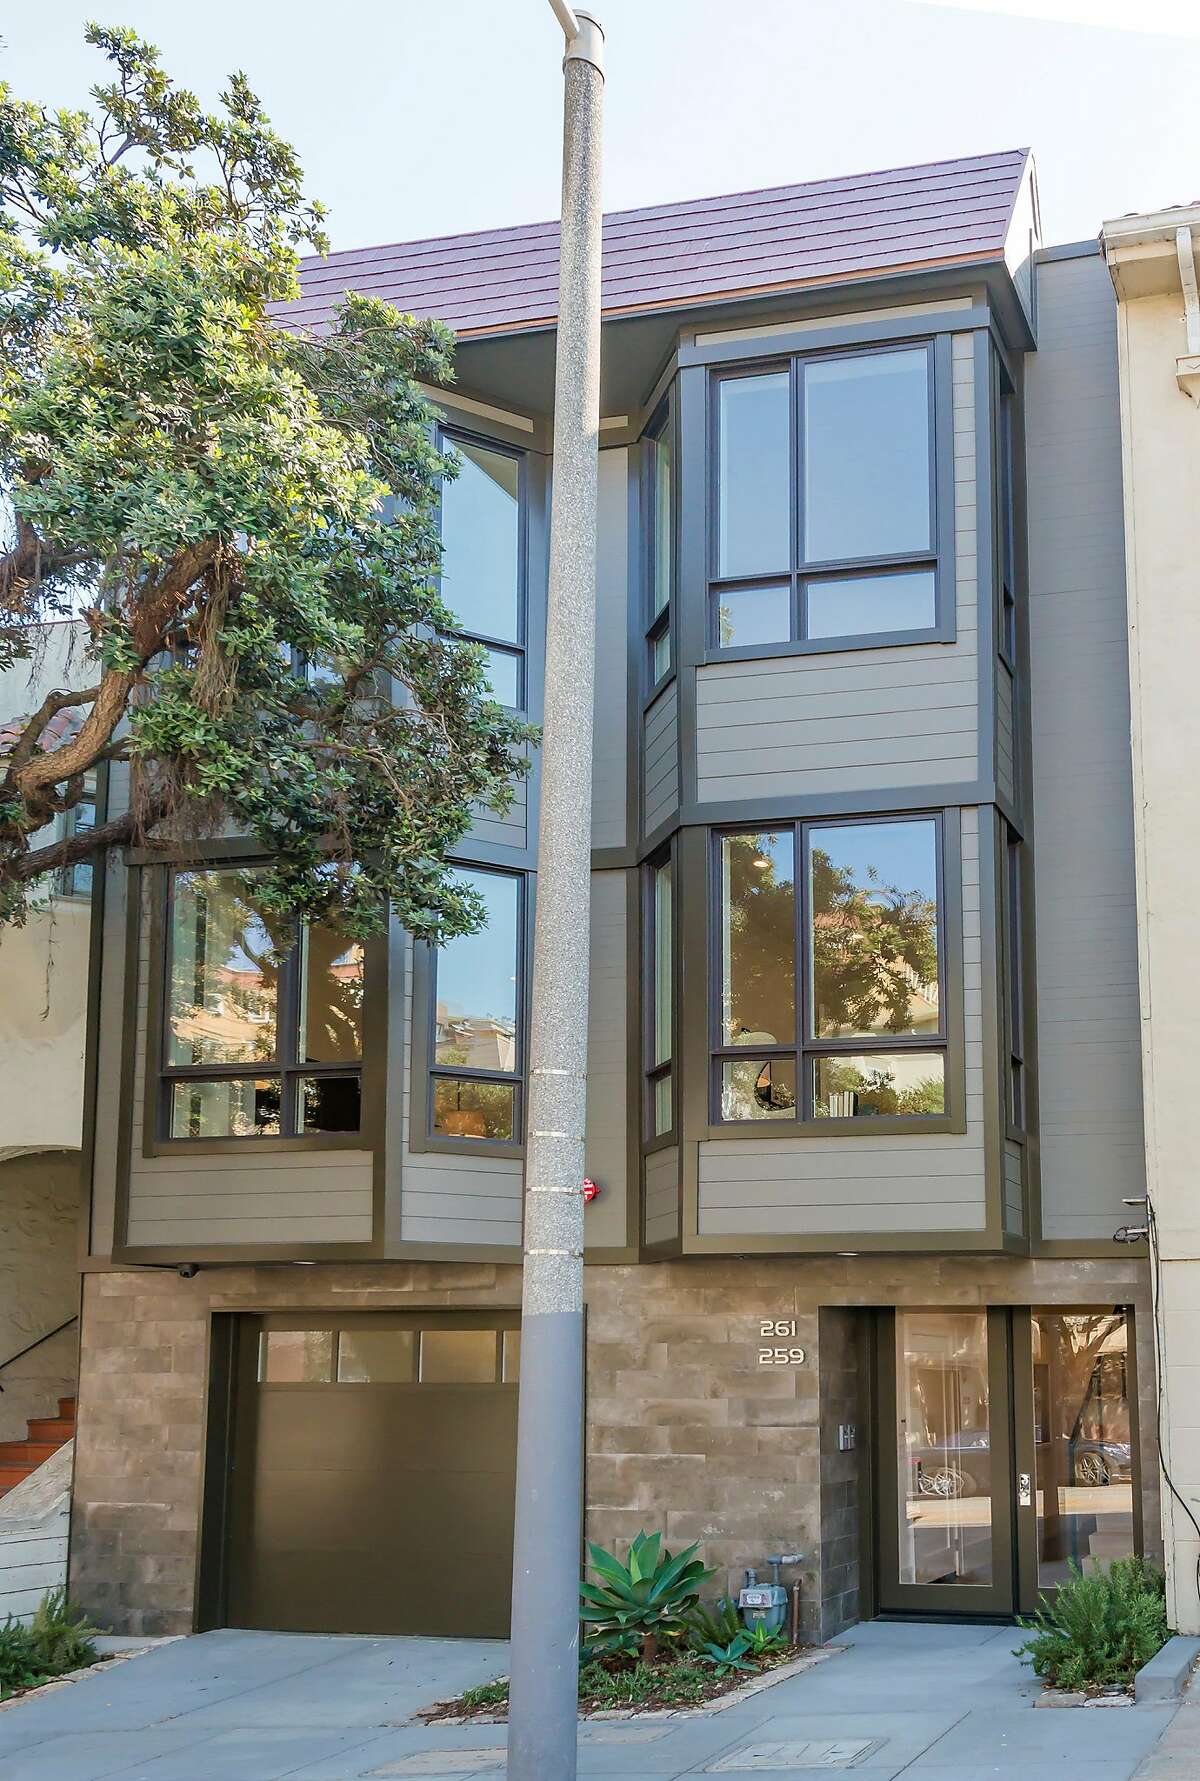 261 Roosevelt Way in Corona Heights is a four-bedroom available for $4.495 million.